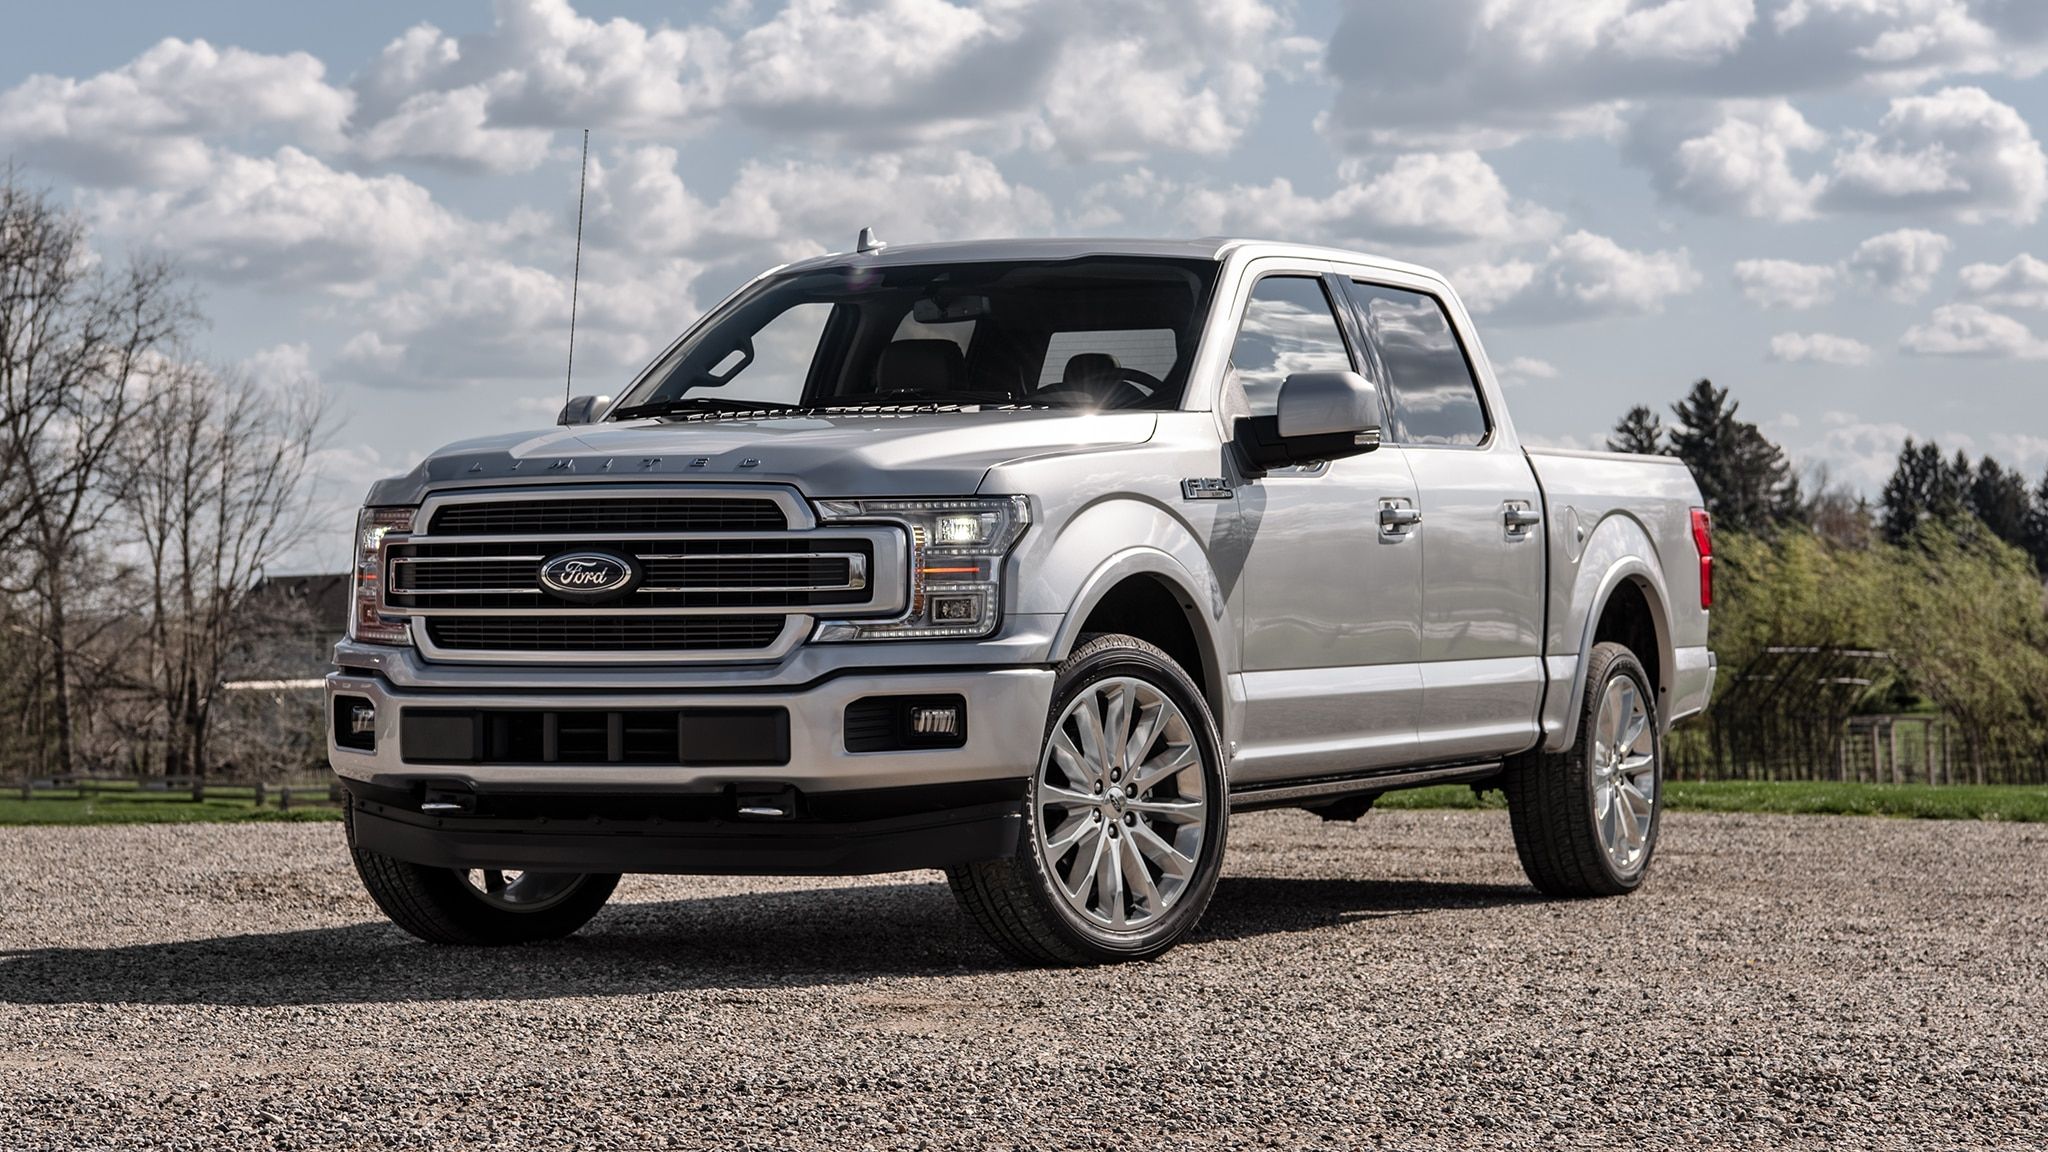 2021 Ford F-150 Wallpapers - Wallpaper Cave